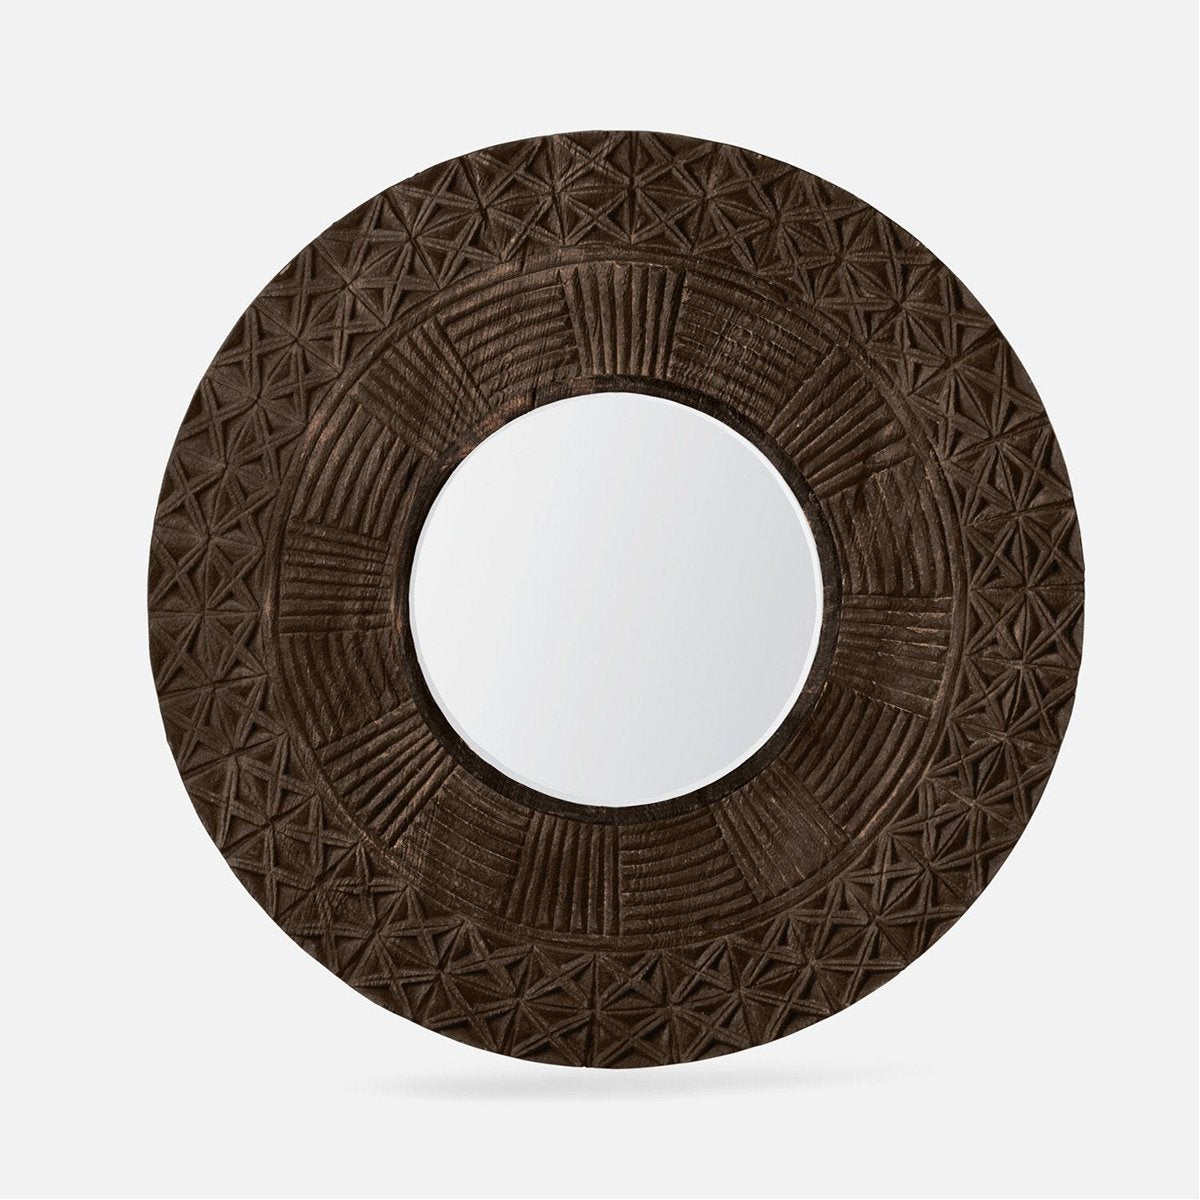 Made Goods Zalara Intricately Carved Round Concaved Mirror